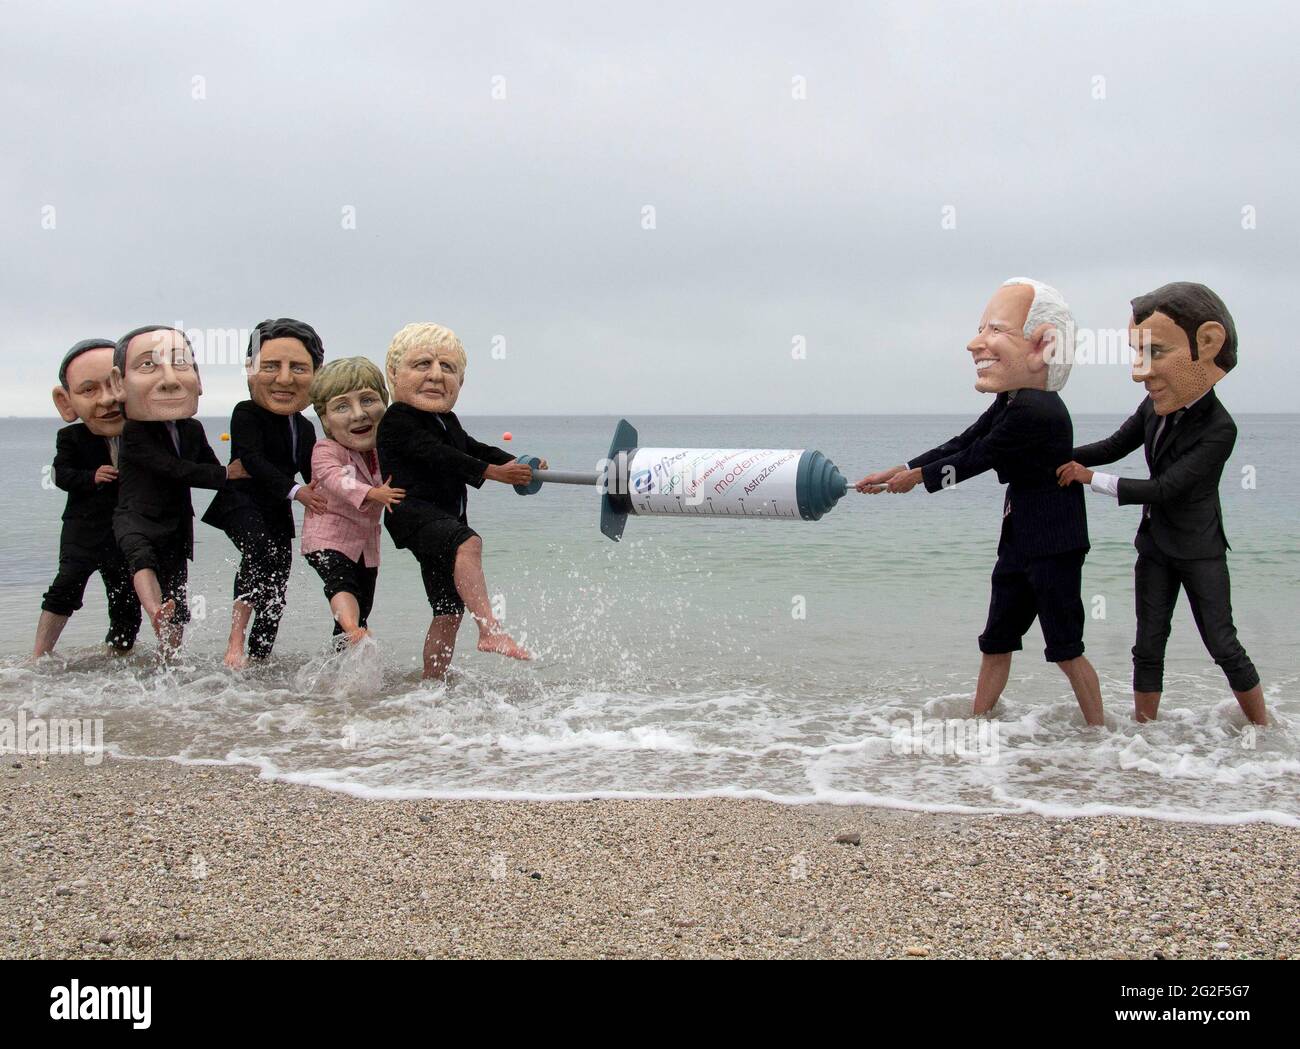 Cornwall, UK. June 11 2021: Members of the People's Vaccine group dress up as G7 leaders and splash each other in the sea at Swanpool, Cornwall. The costumed protesters also hold a big vaccine needles between them. 11th June 2021. Anna Hatfield/Pathos Credit: One Up Top Editorial Images/Alamy Live News Stock Photo